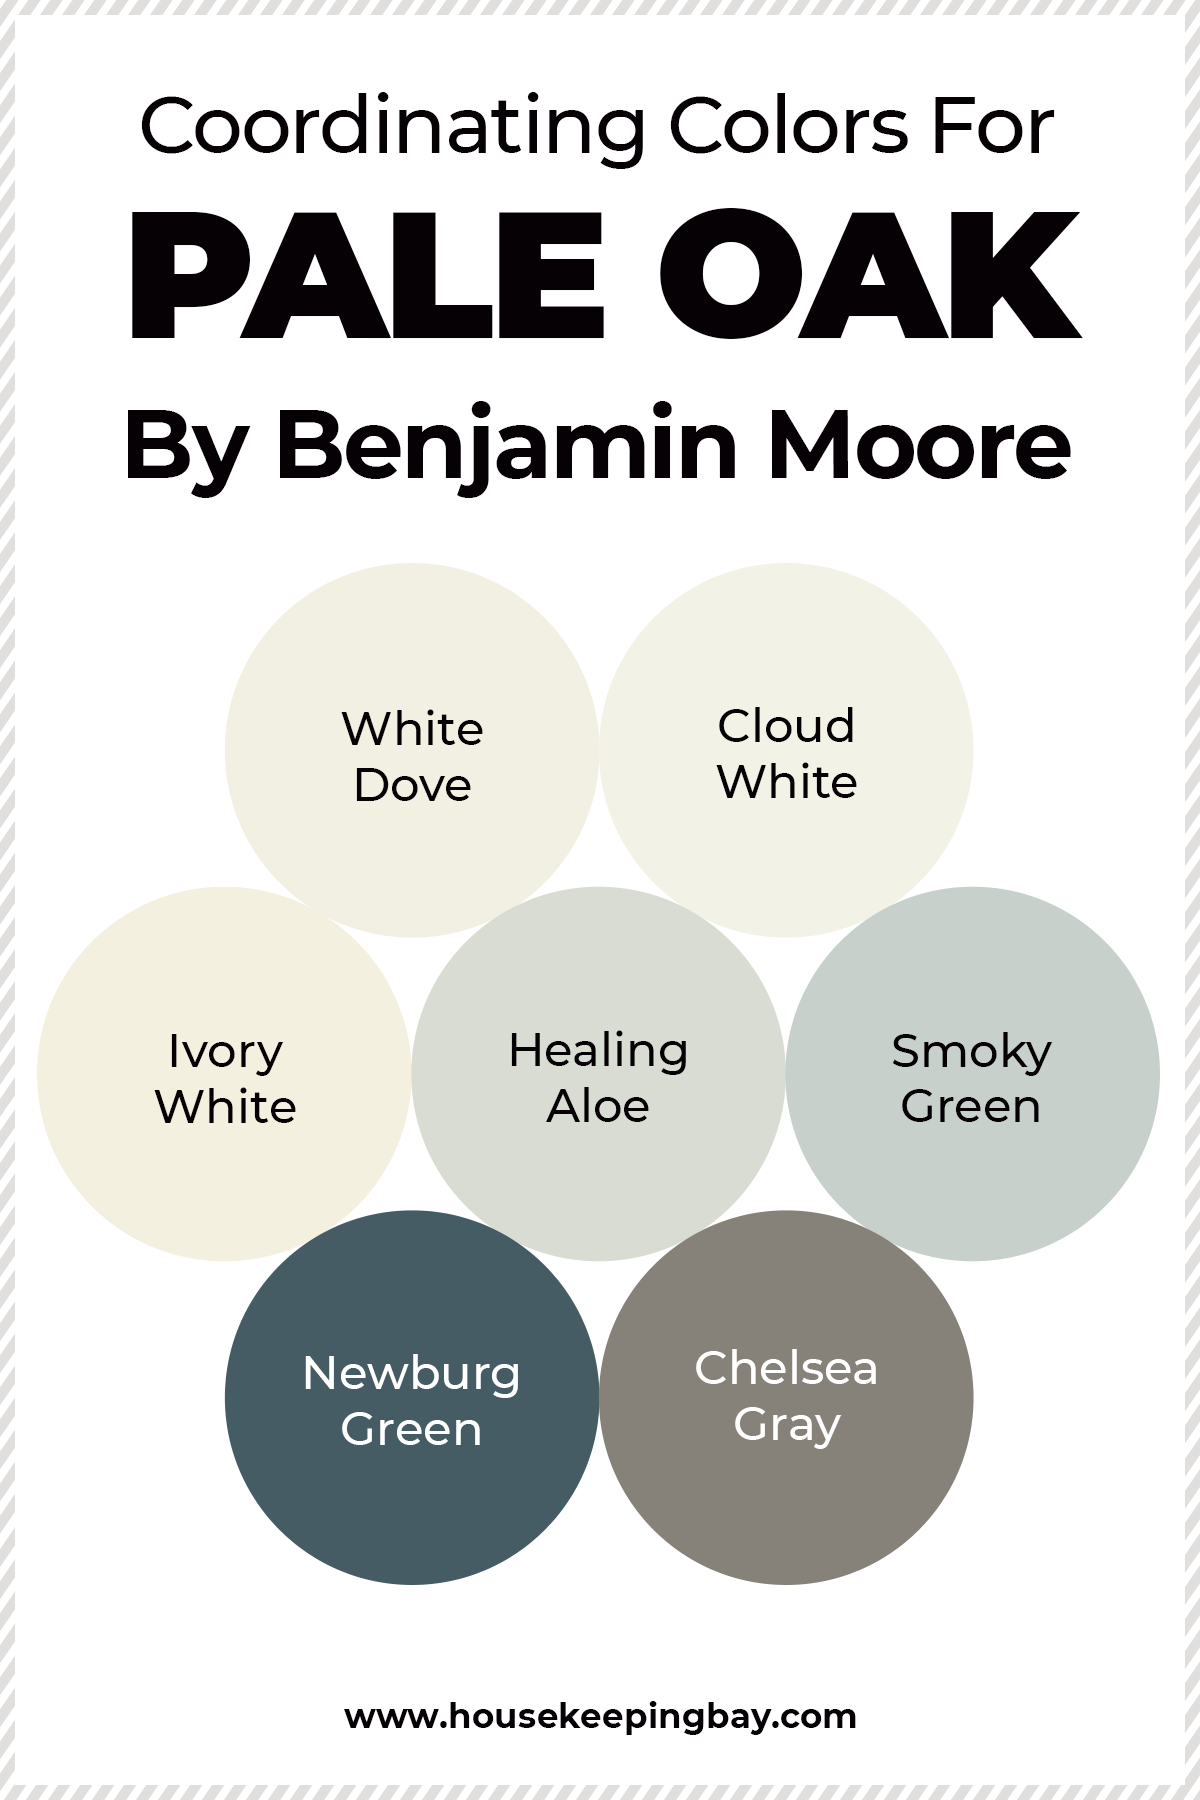 Coordinating Colors For Pale Oak By Benjamin Moore